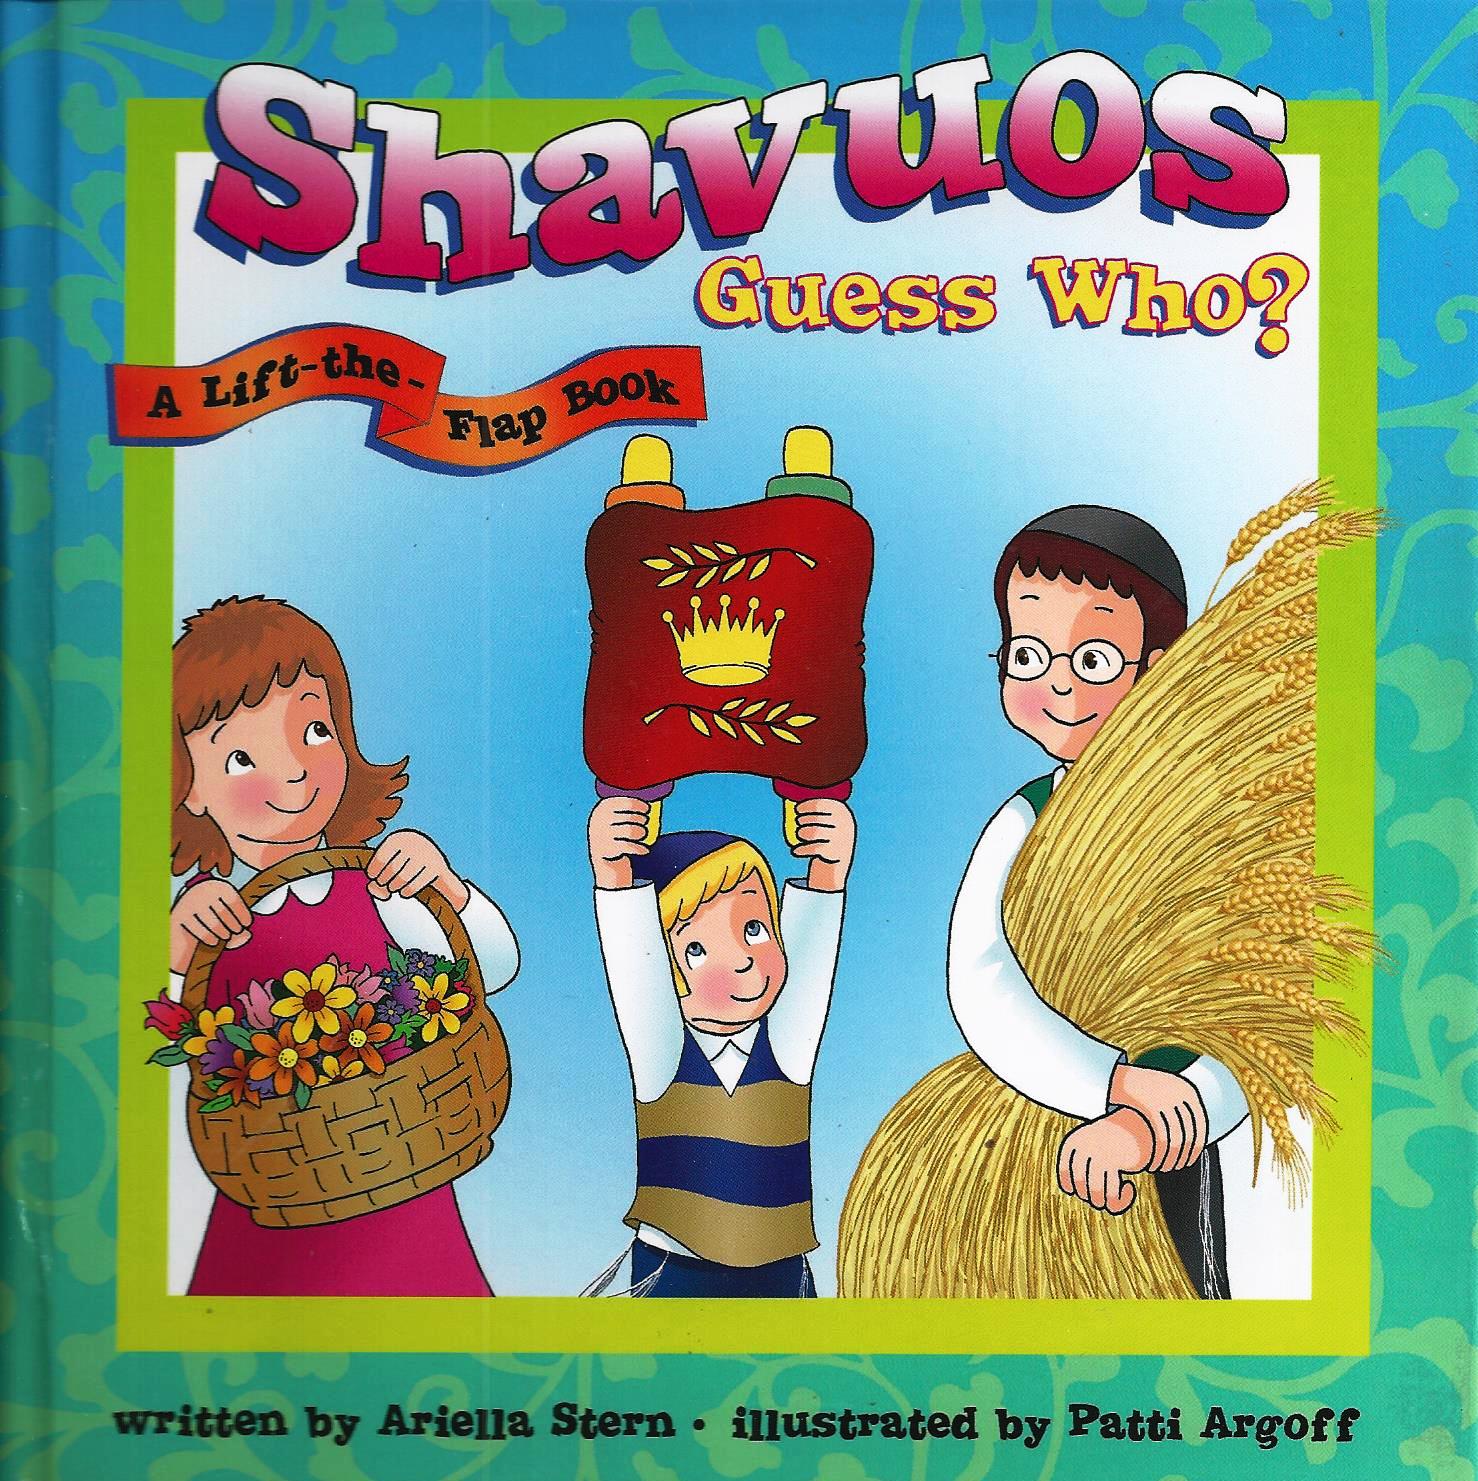 Shavuos Guess Who? A lift the flap book